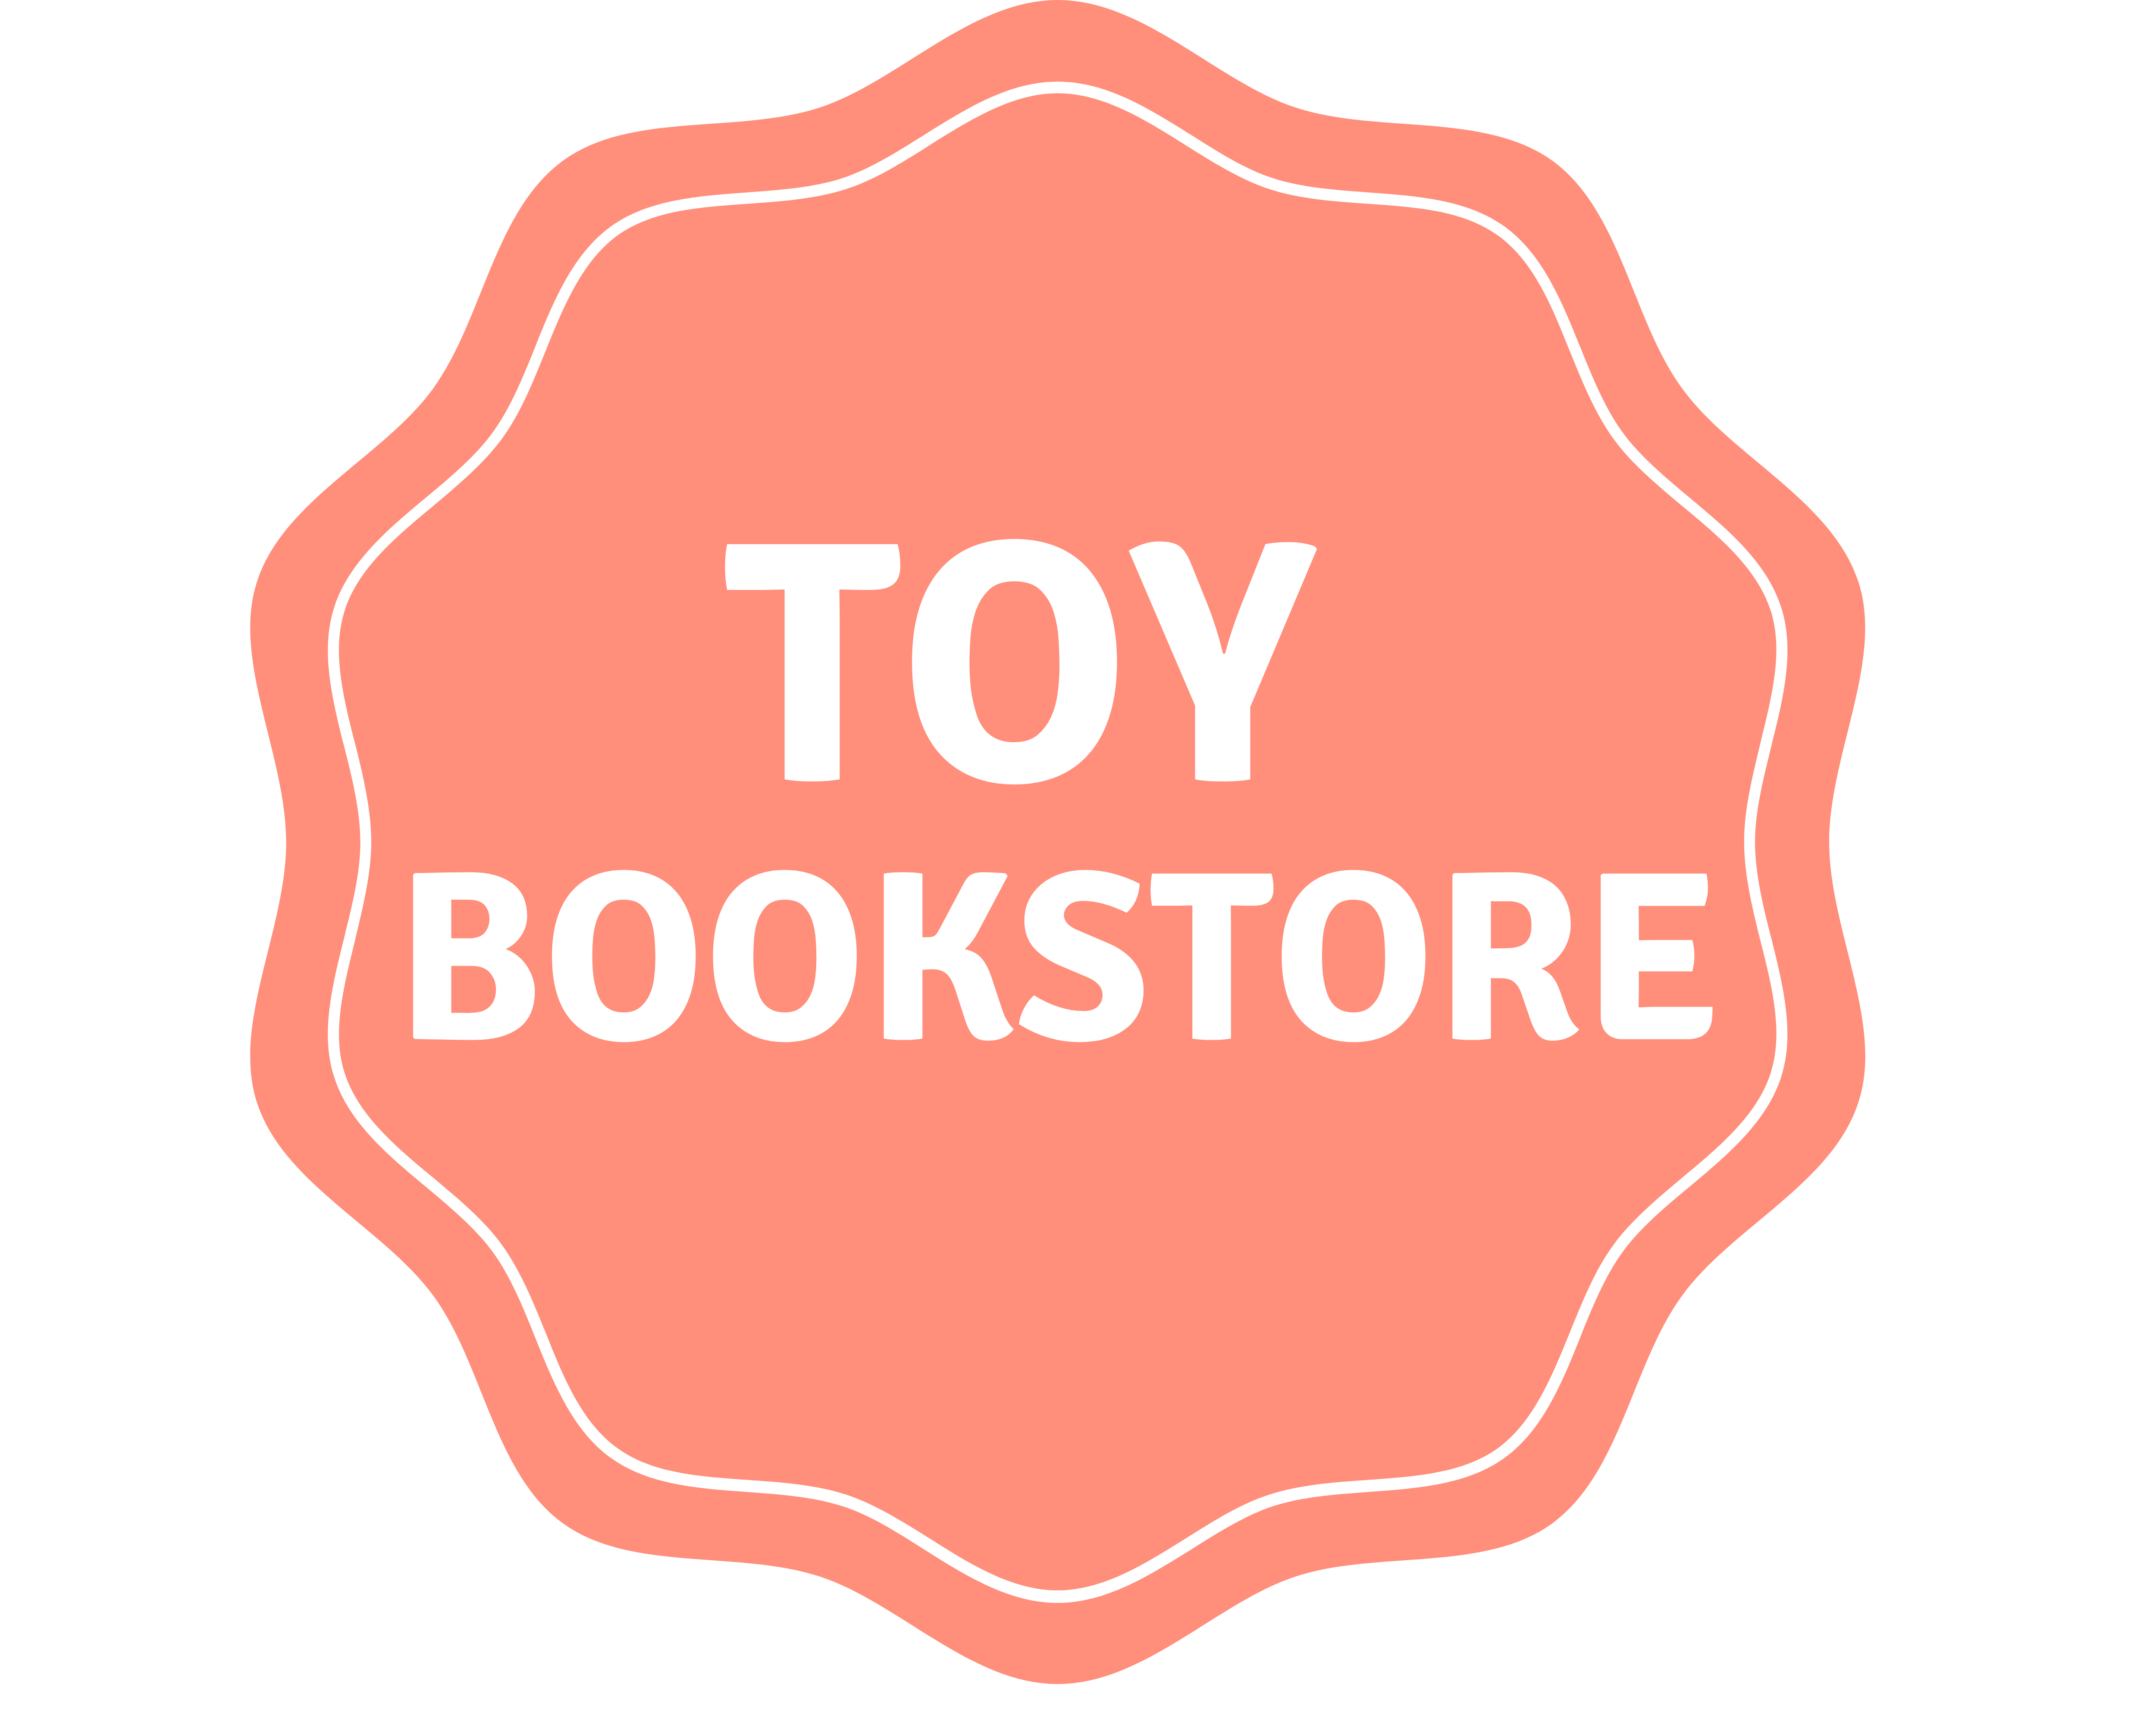 Toy Bookstore